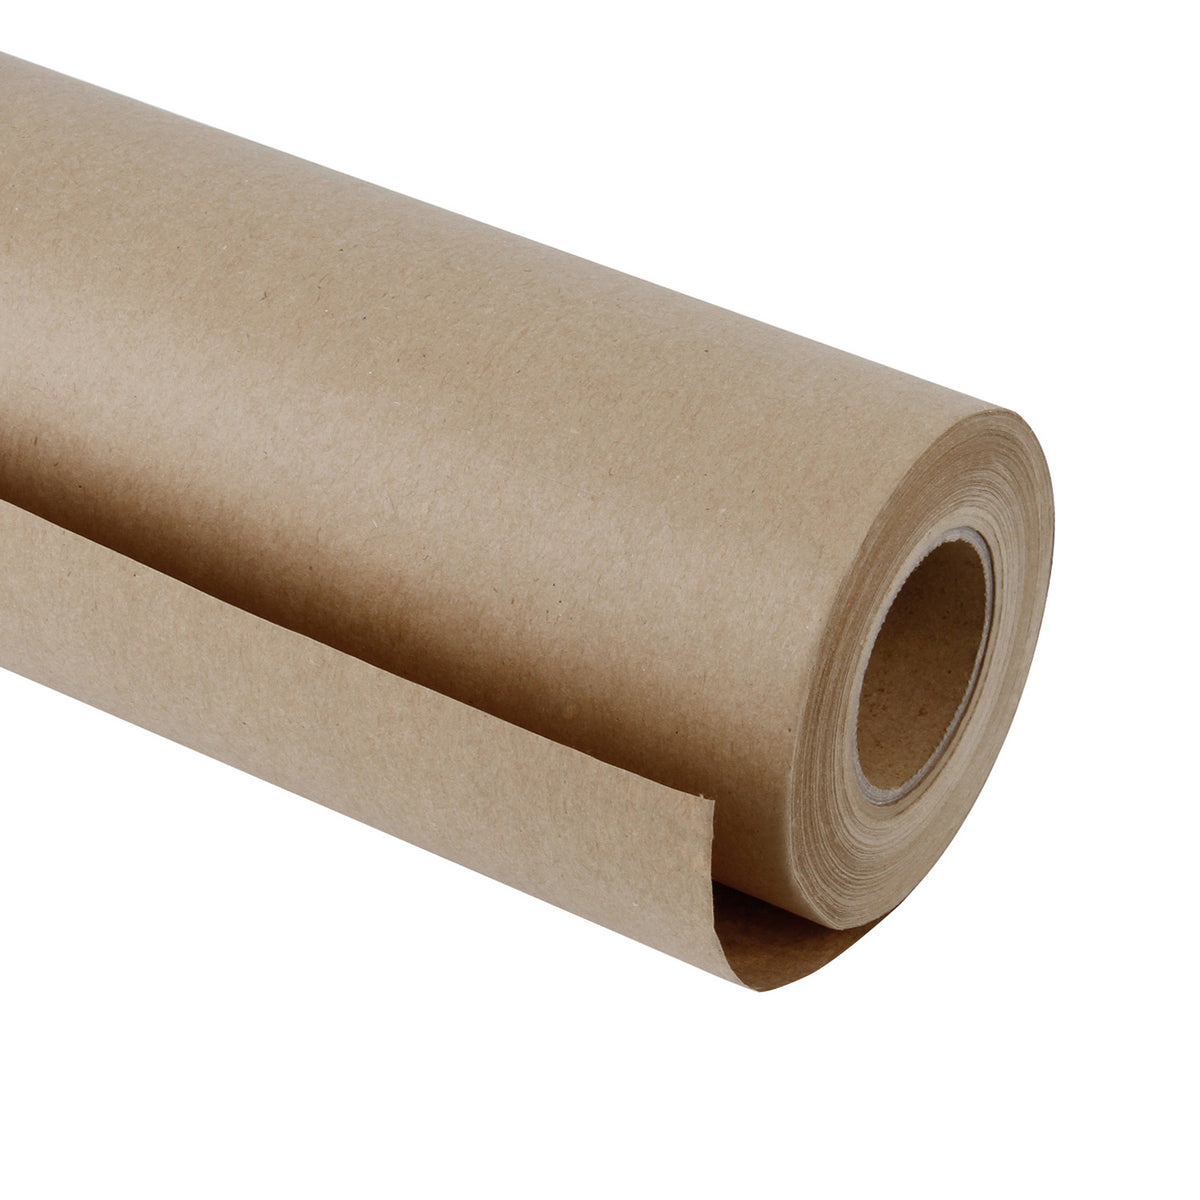 RUSPEPA Black and Brown Kraft Paper Roll - Black: 18 inches x 100 feet,  Brown: 48 inches x 100 feet - Recyclable Paper for Wrapping, Craft,  Packing